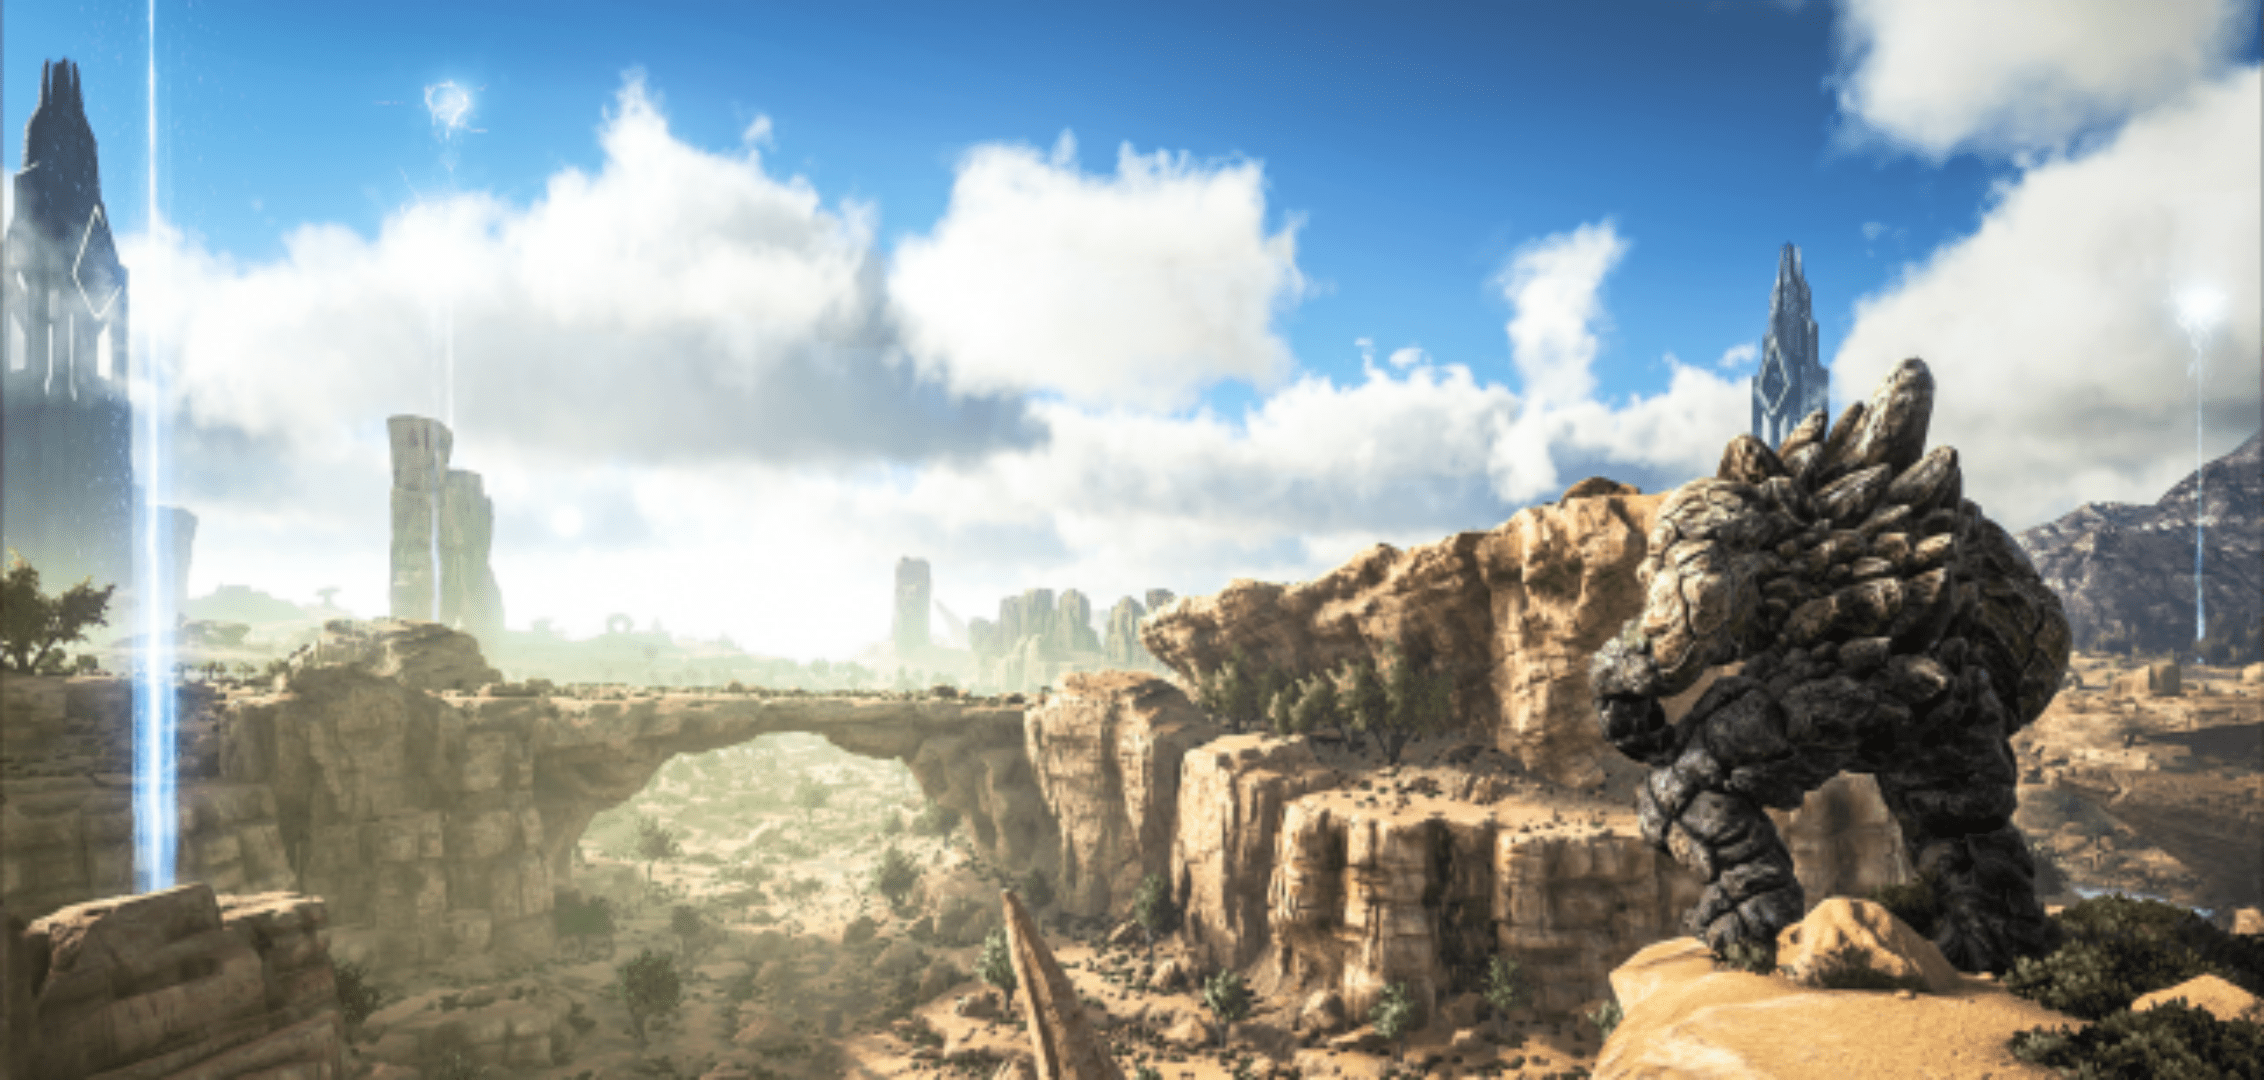 ARK: Survival Evolved Gets New Expansion and Xbox One Update!